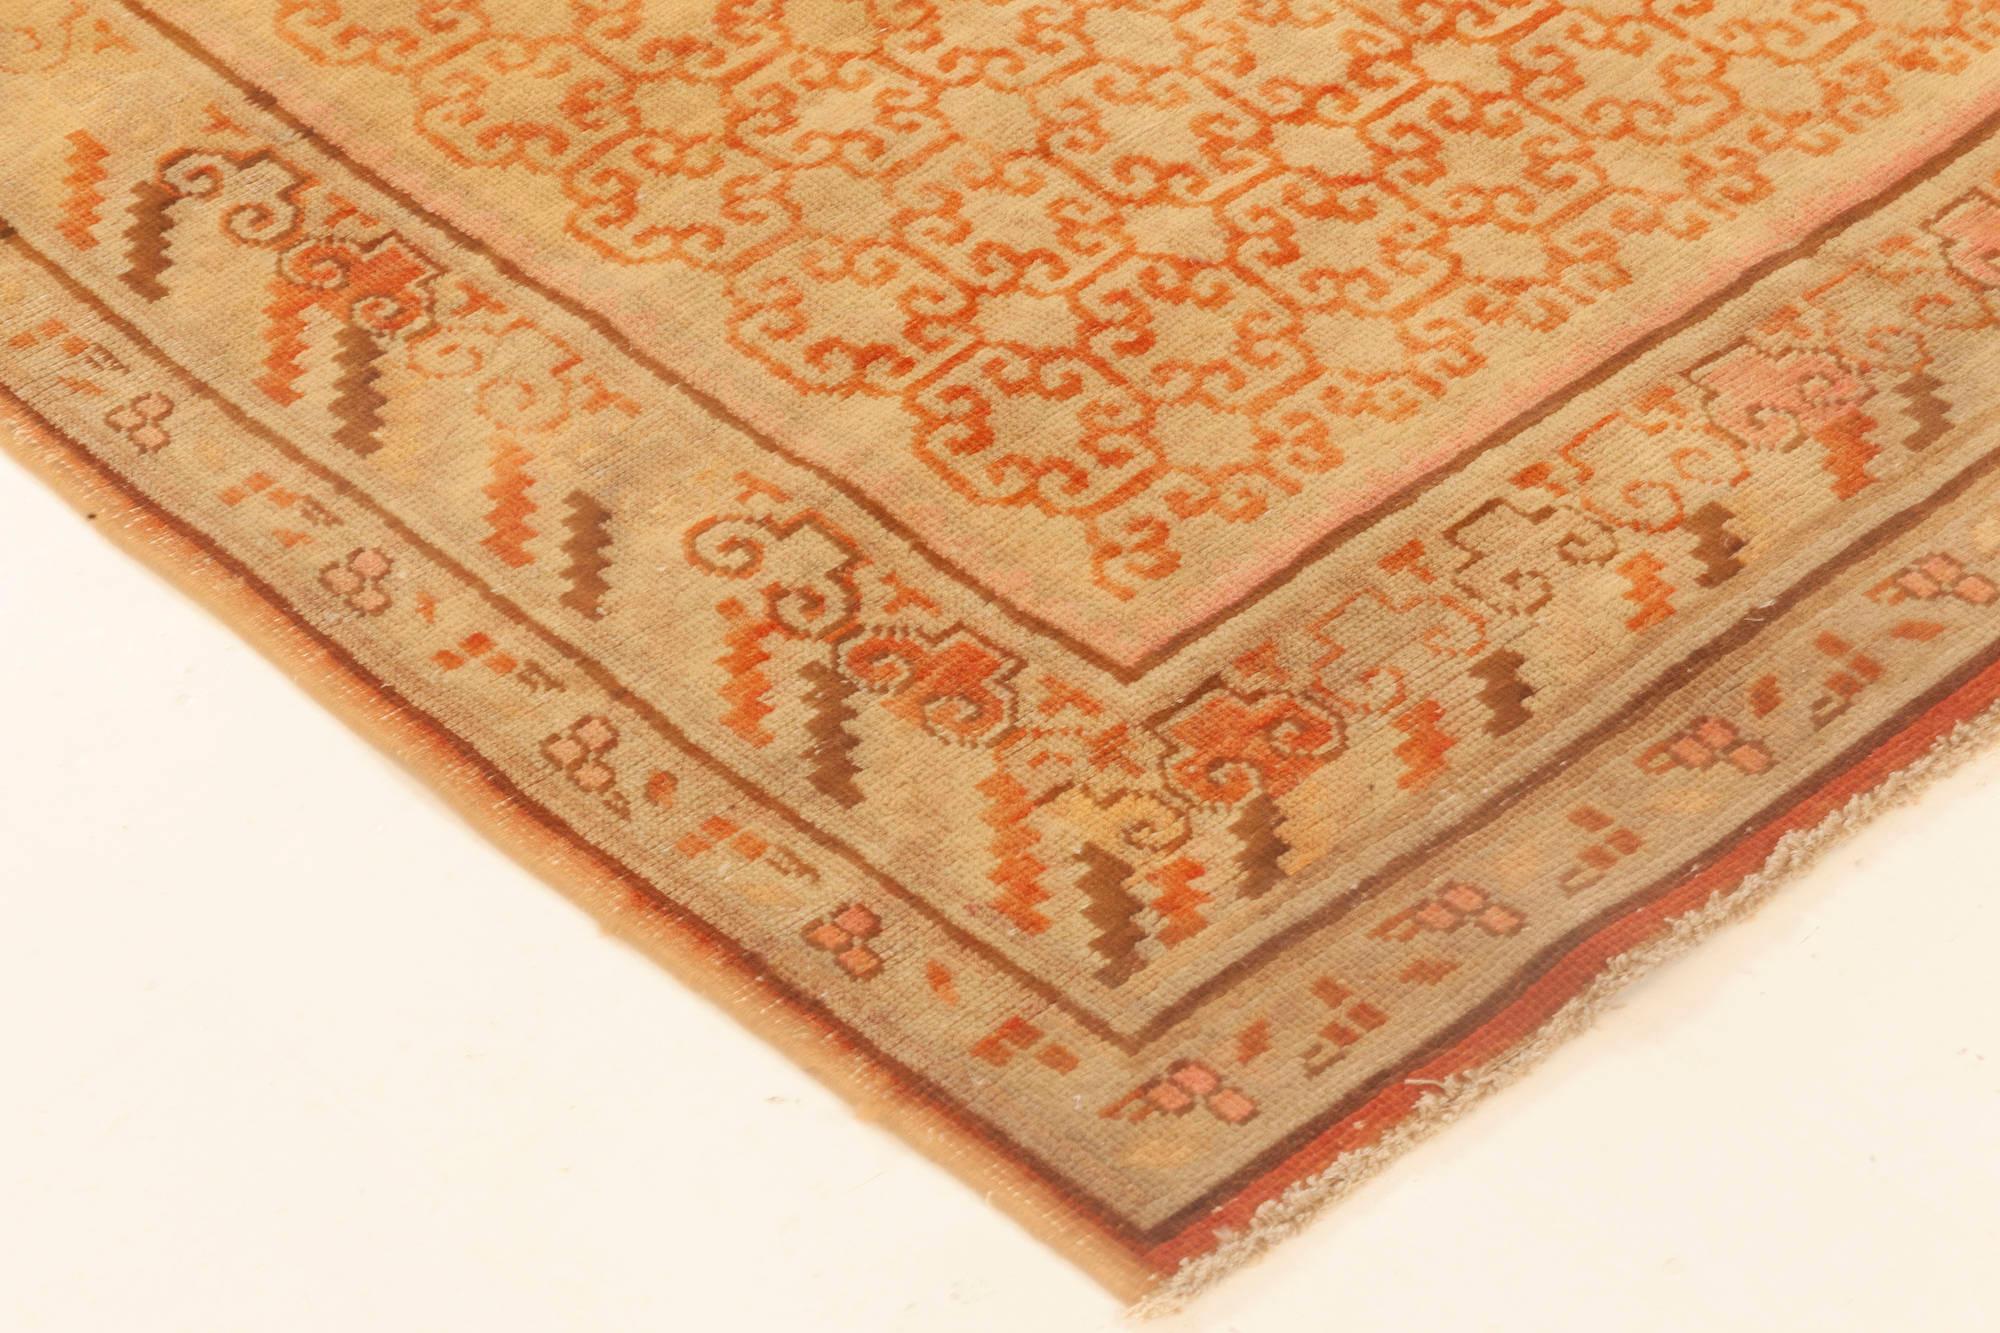 Midcentury Samarkand Orange Handmade Wool Rug In Good Condition For Sale In New York, NY